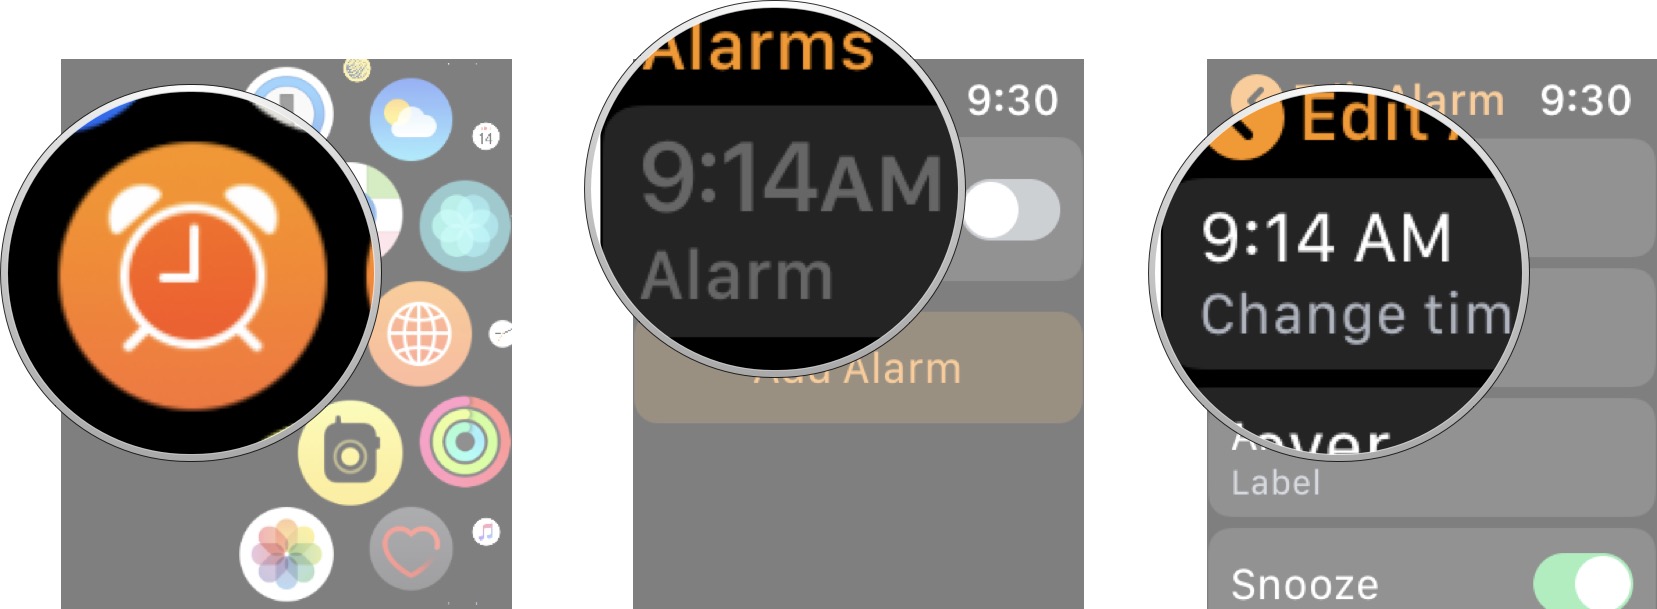 Launch alarms app on Apple Watch, tap the alarm you want to edit, and then tap the option you want to change.